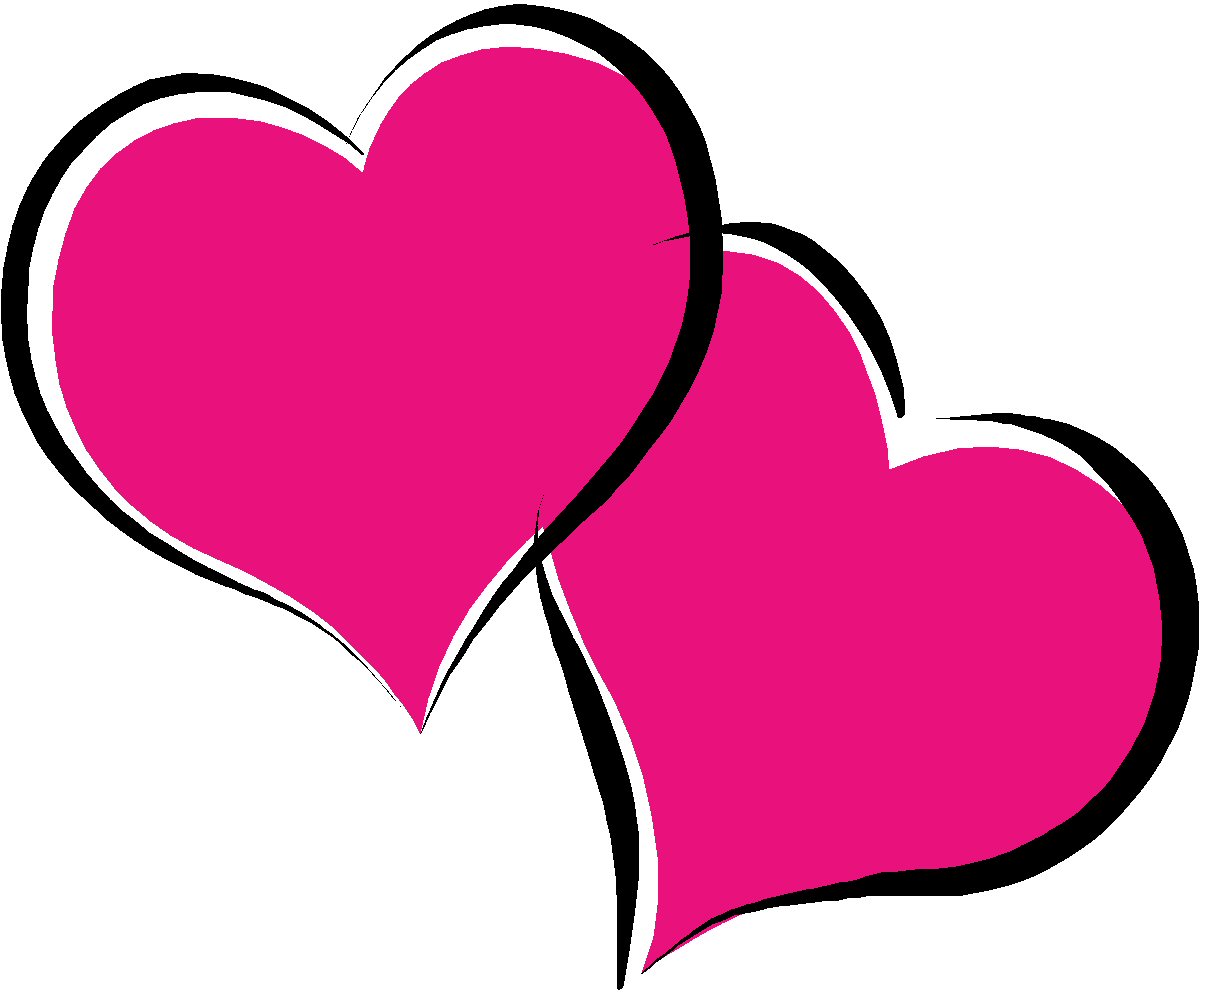 heart clip art free images - photo #47